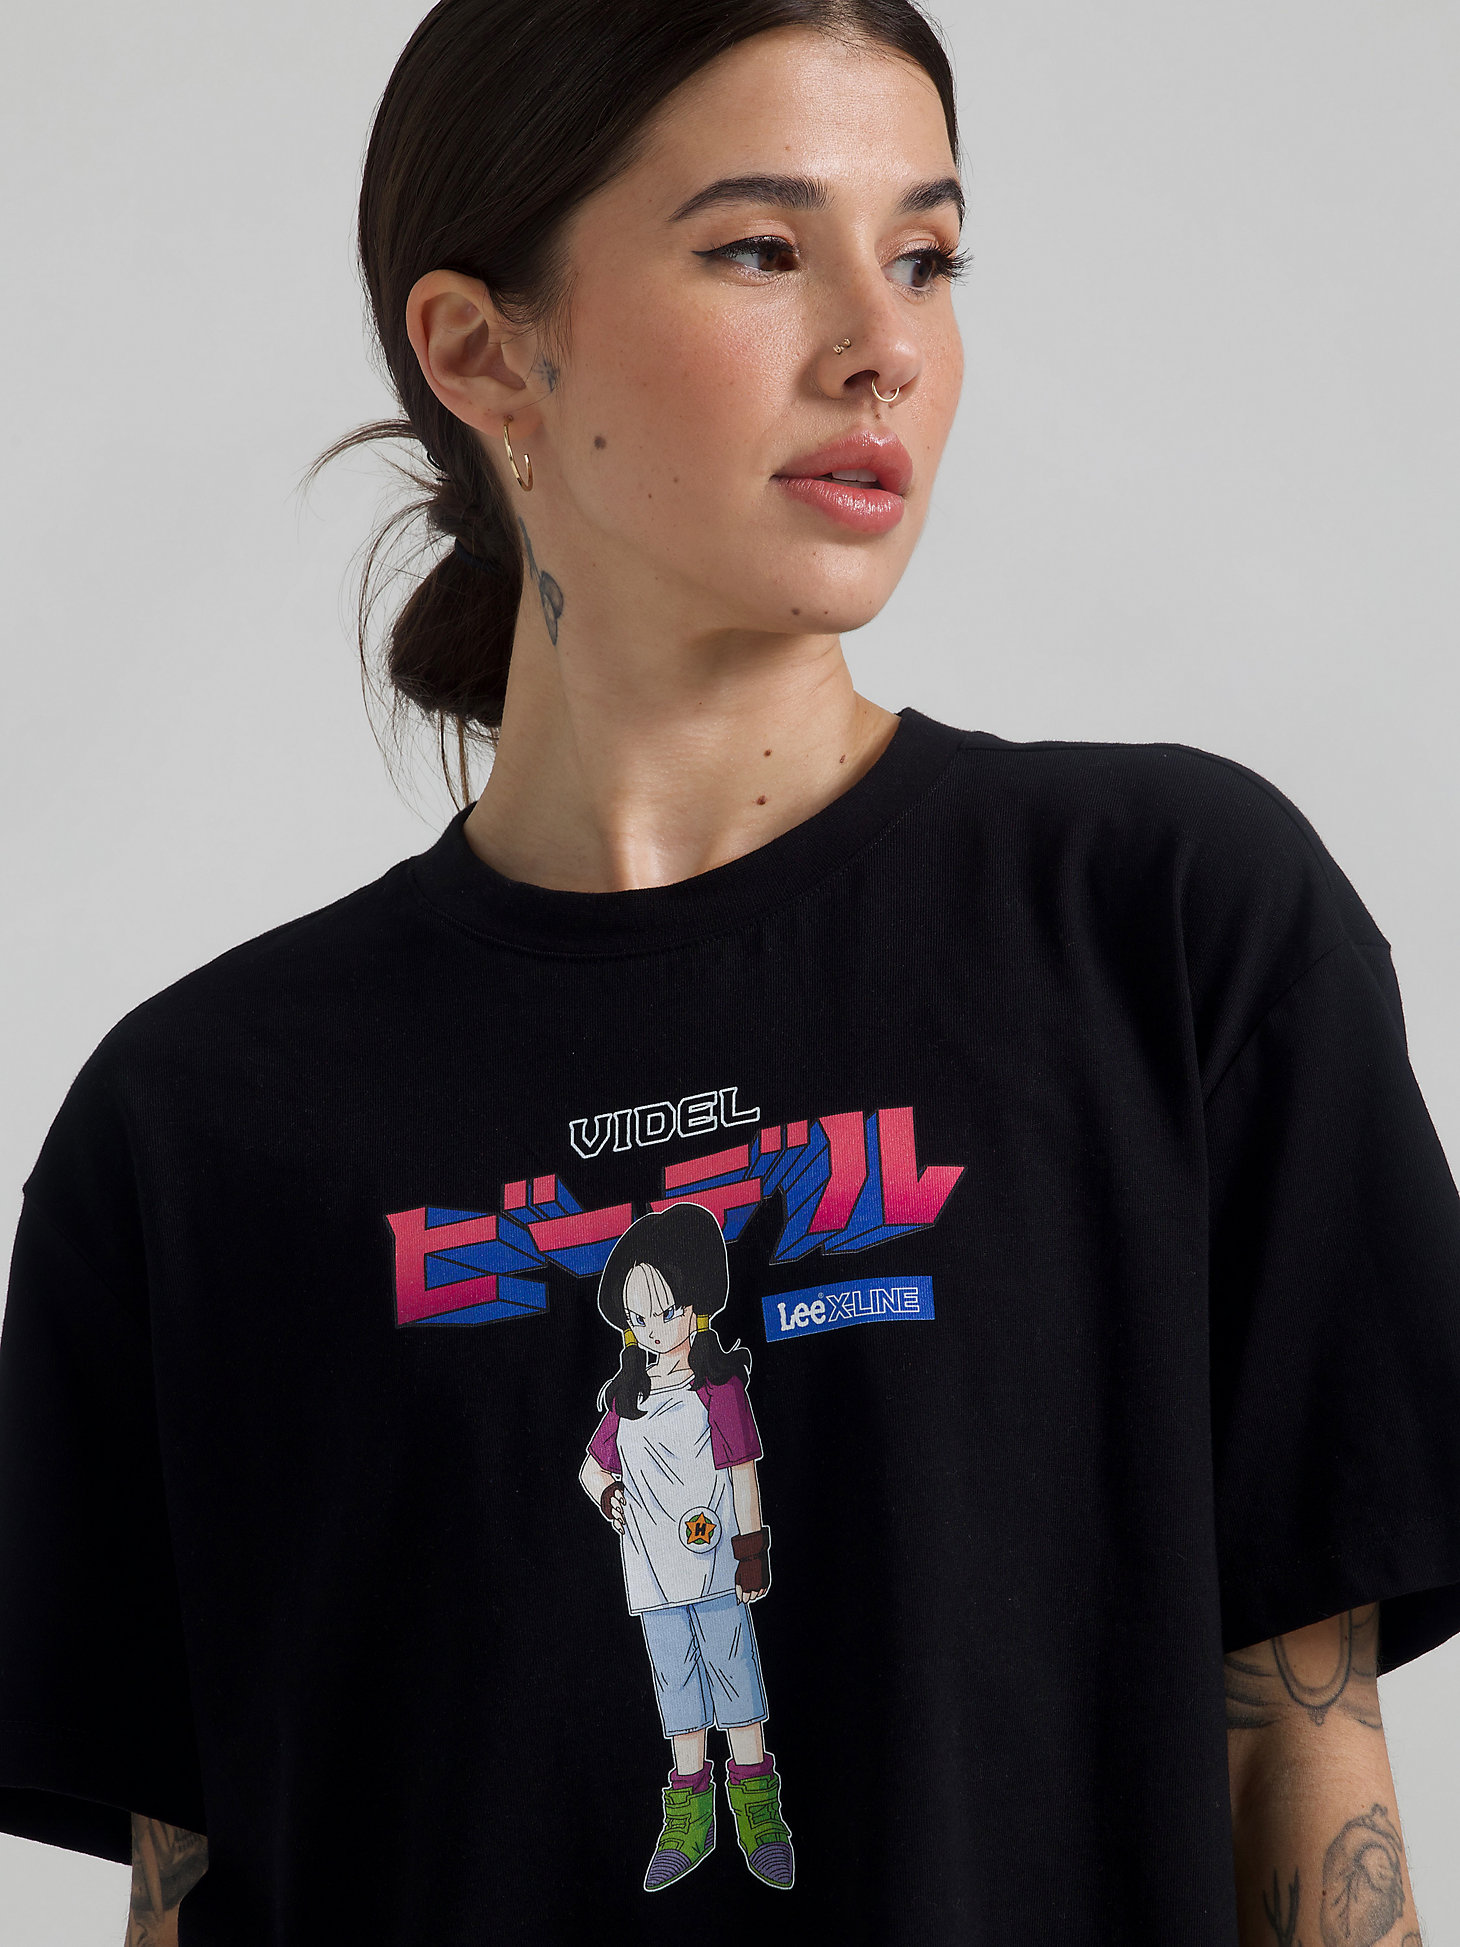 Women's Lee and Dragon Ball Z Videl Graphic Tee in Black alternative view 1